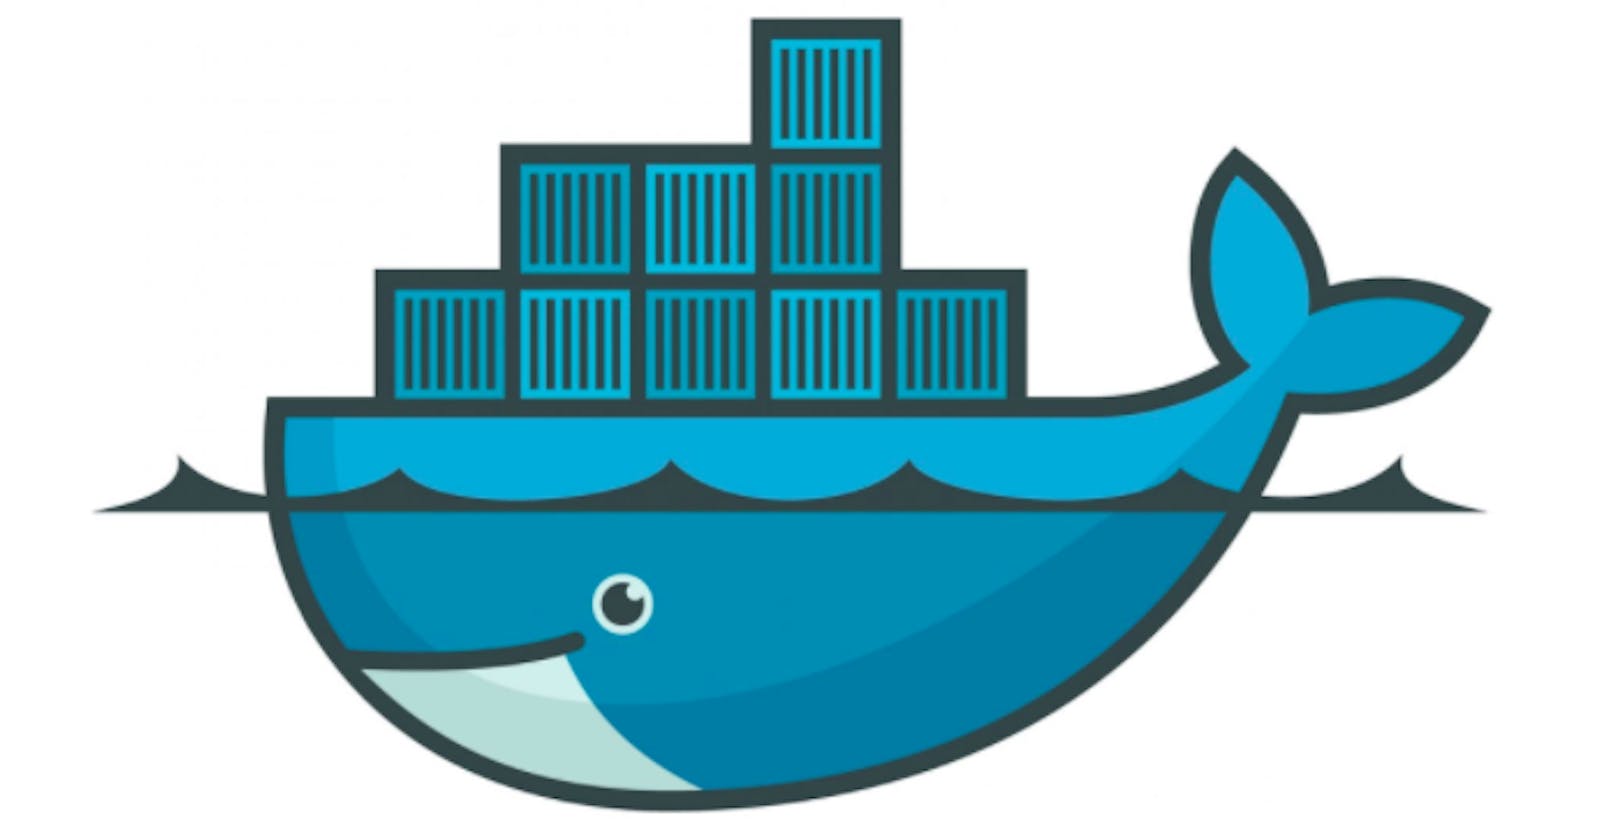 How to set up secure local credential storage for Docker on Ubuntu 20.04